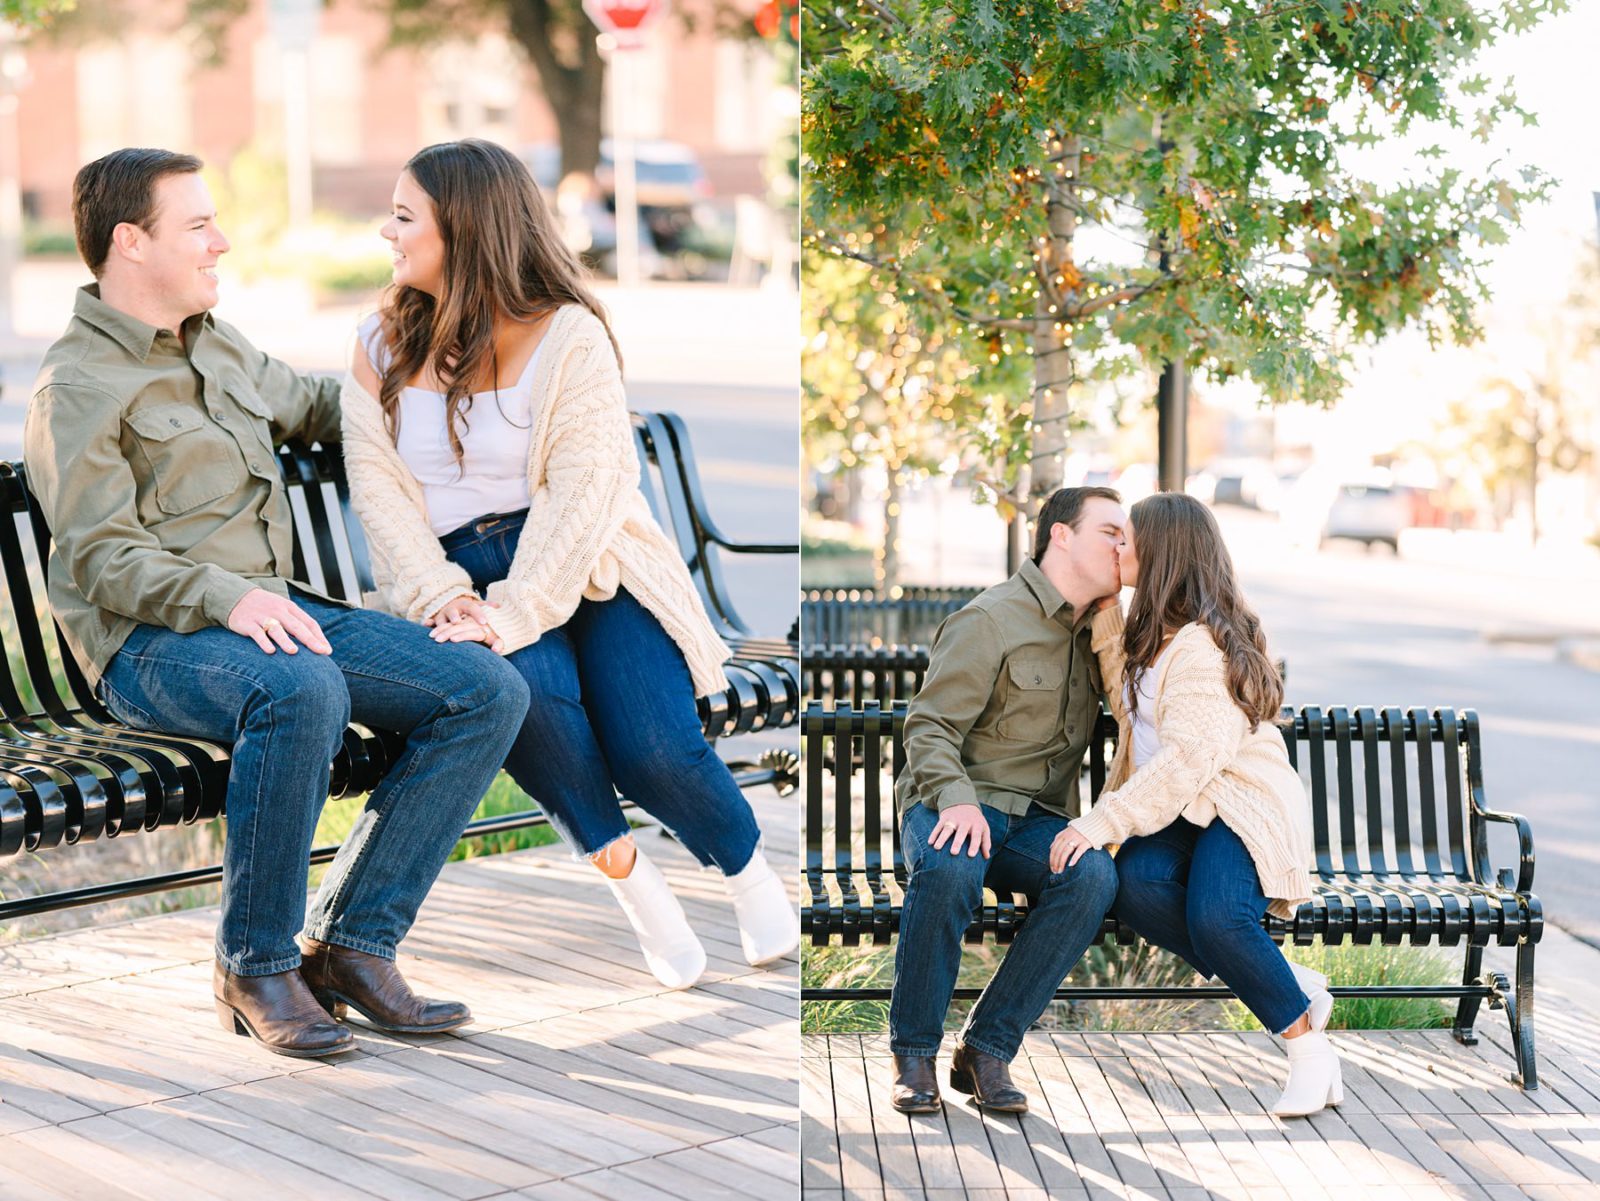 downtown round rock engagement session, round rock square, engagement session round rock square, north austin engagement session location, christmas photo at woodbine mansion, round rock christmas photos, engagement photo locations in round rock, woodbine mansion, round rock wedding venue, tara lyons photography